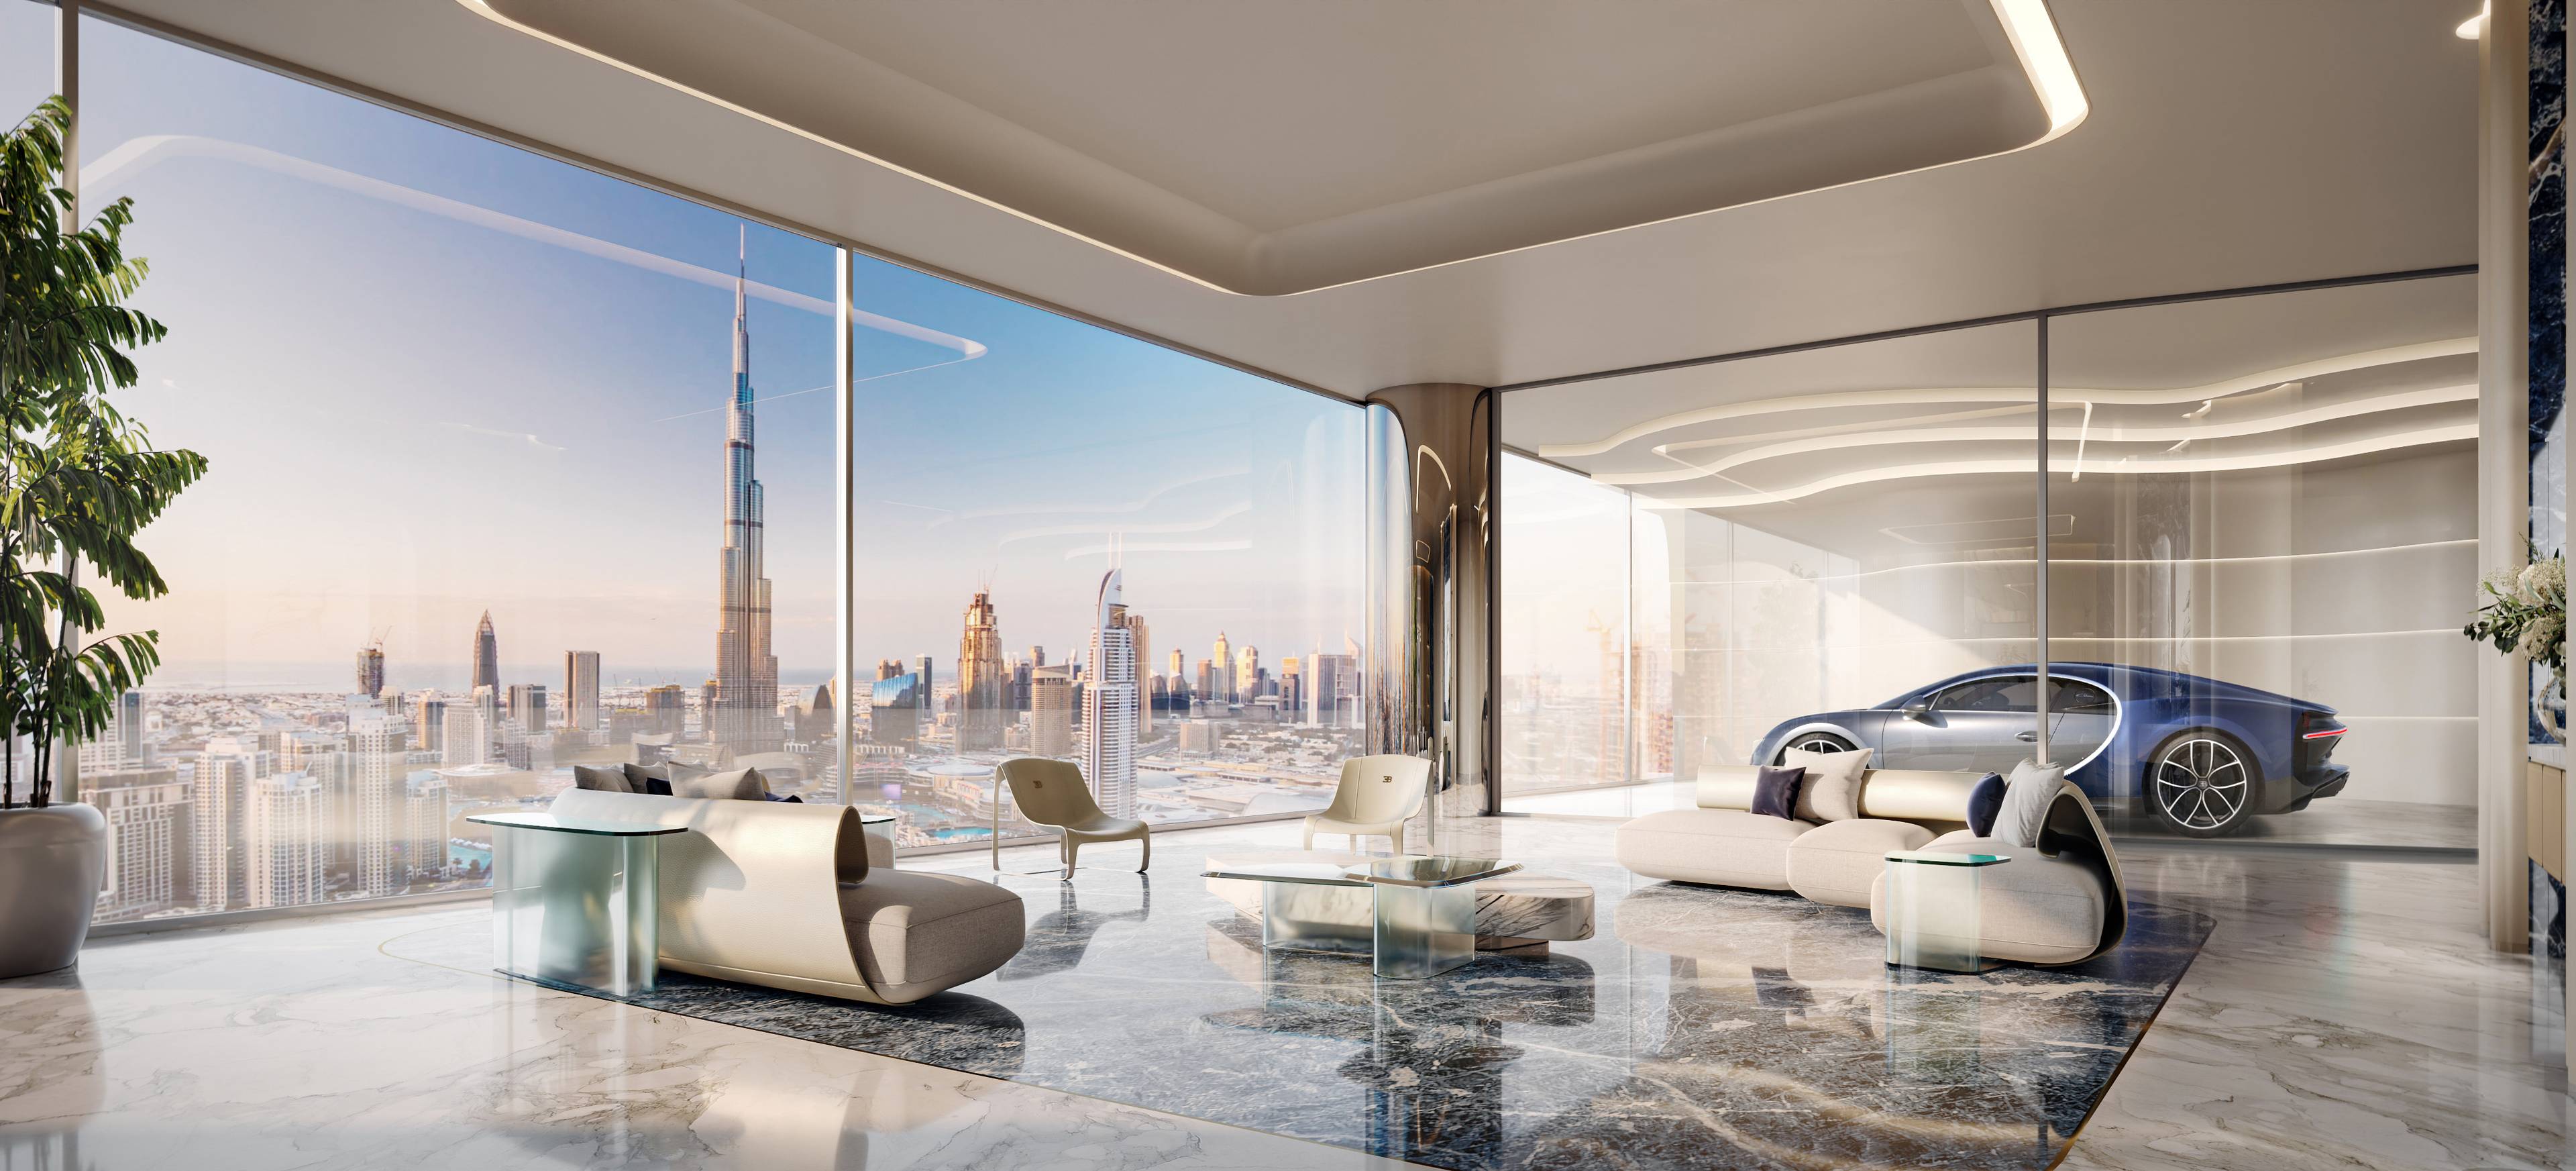 3 LUXURIOUS BEDROOMS WITH A POOL, BUGATTI RESIDENCES, BRANDED APARTMENT WITH AN INTICING PAYMENT PLAN